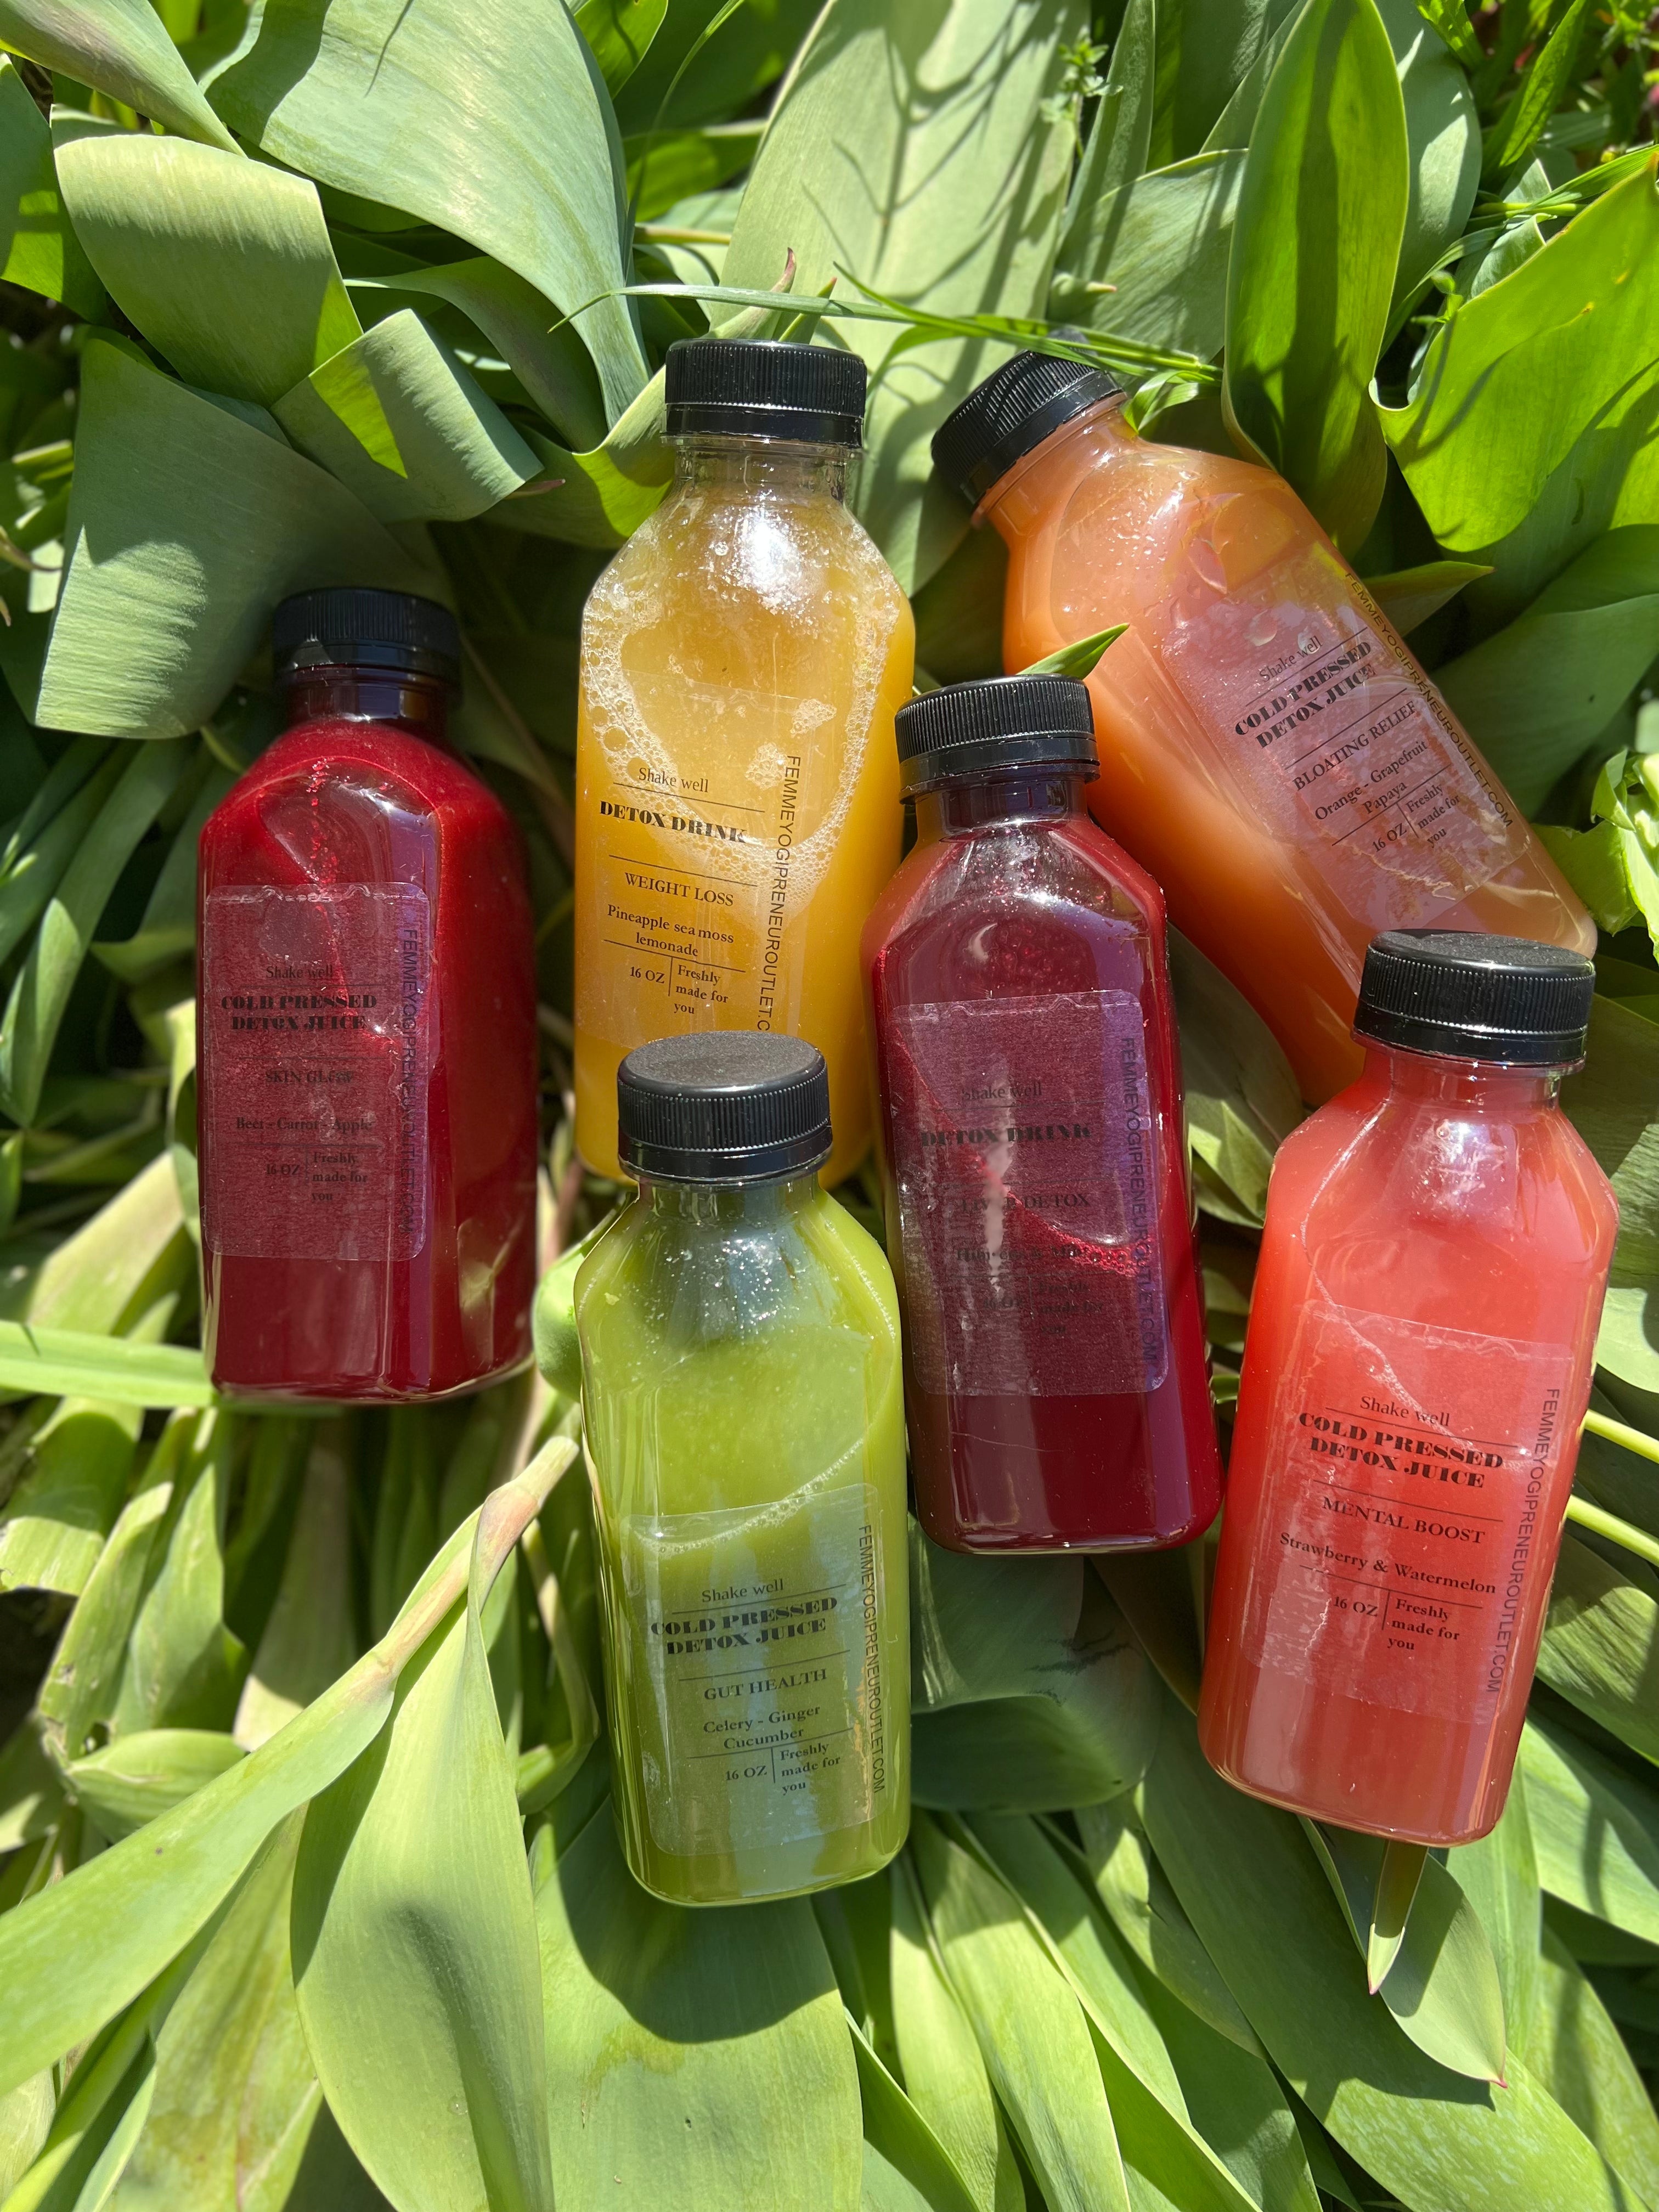 10 Day Juice cleanse - 30 Bottles Raw Fruit Juices